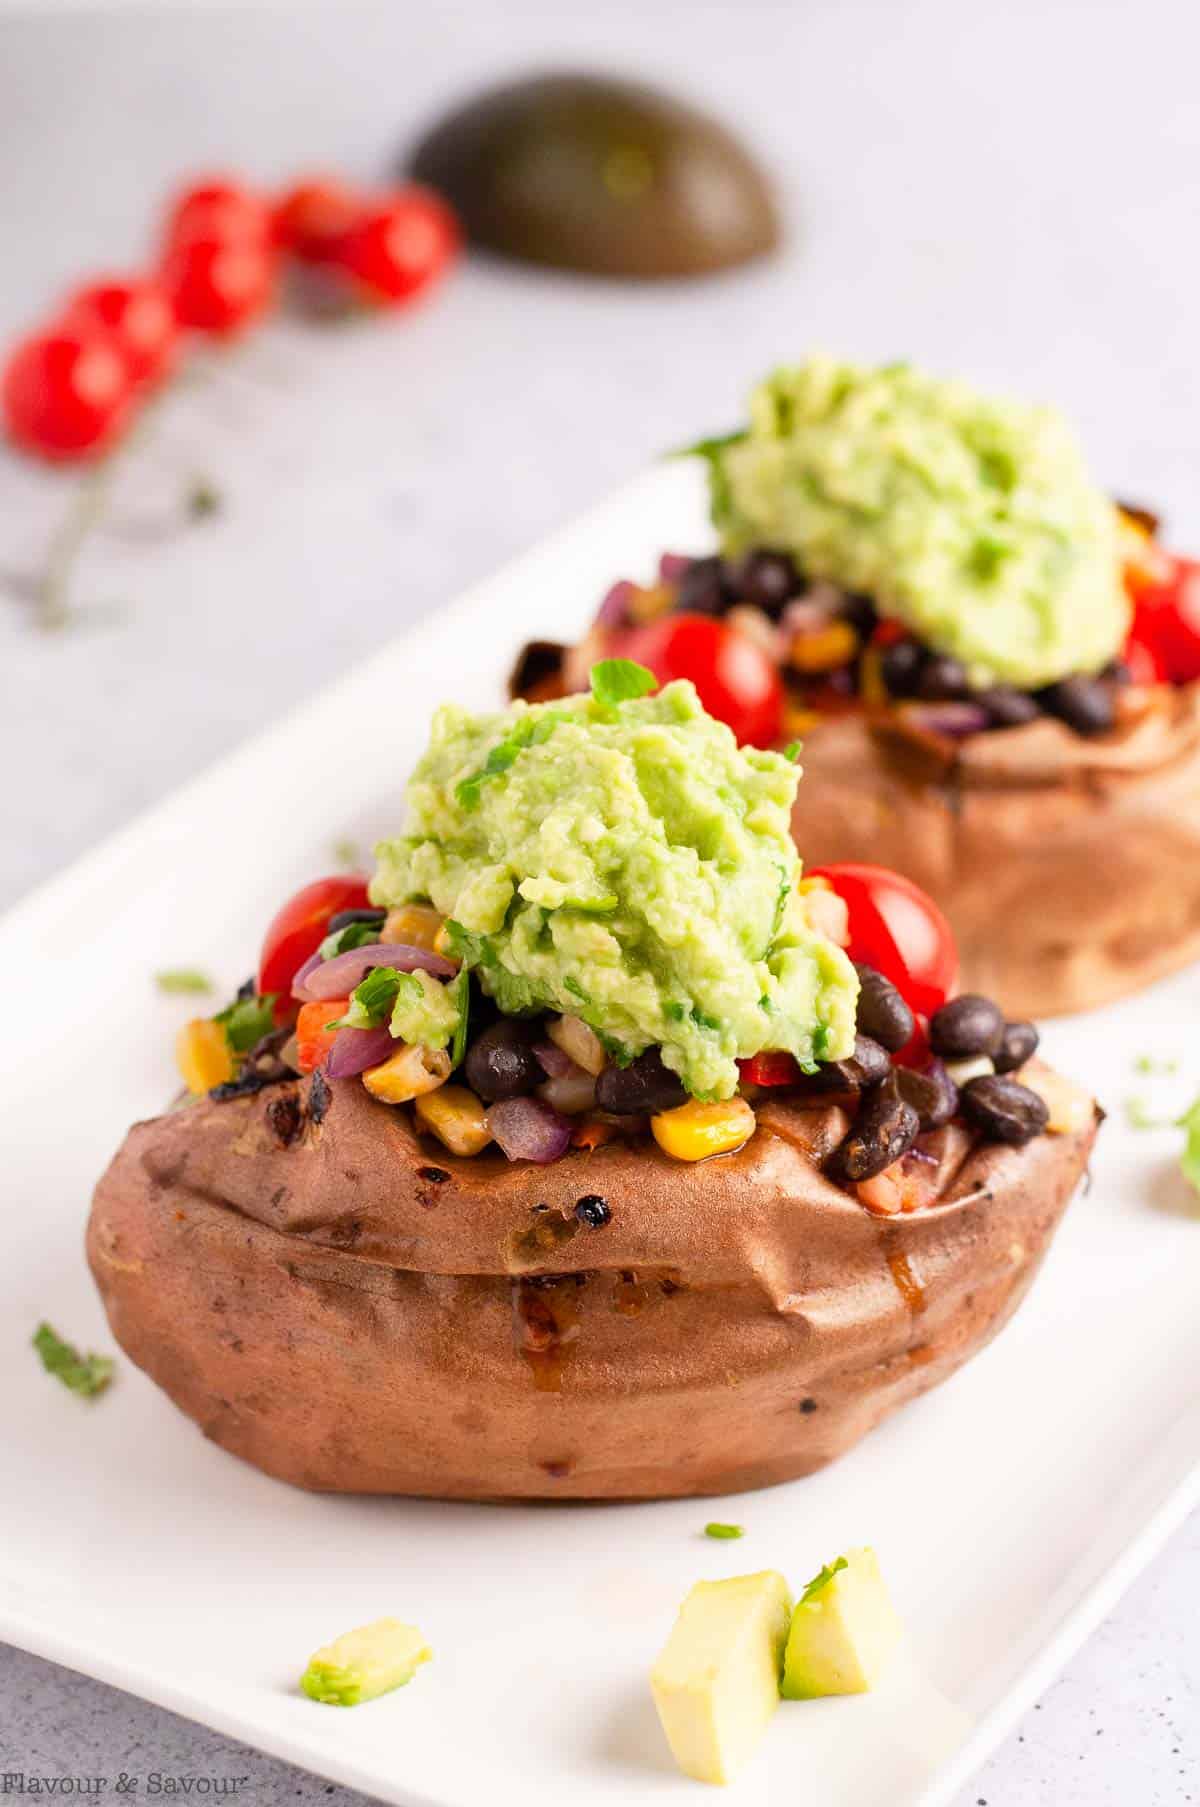 Two sweet potatoes stuffed with black bean mixture and topped with guacamole.